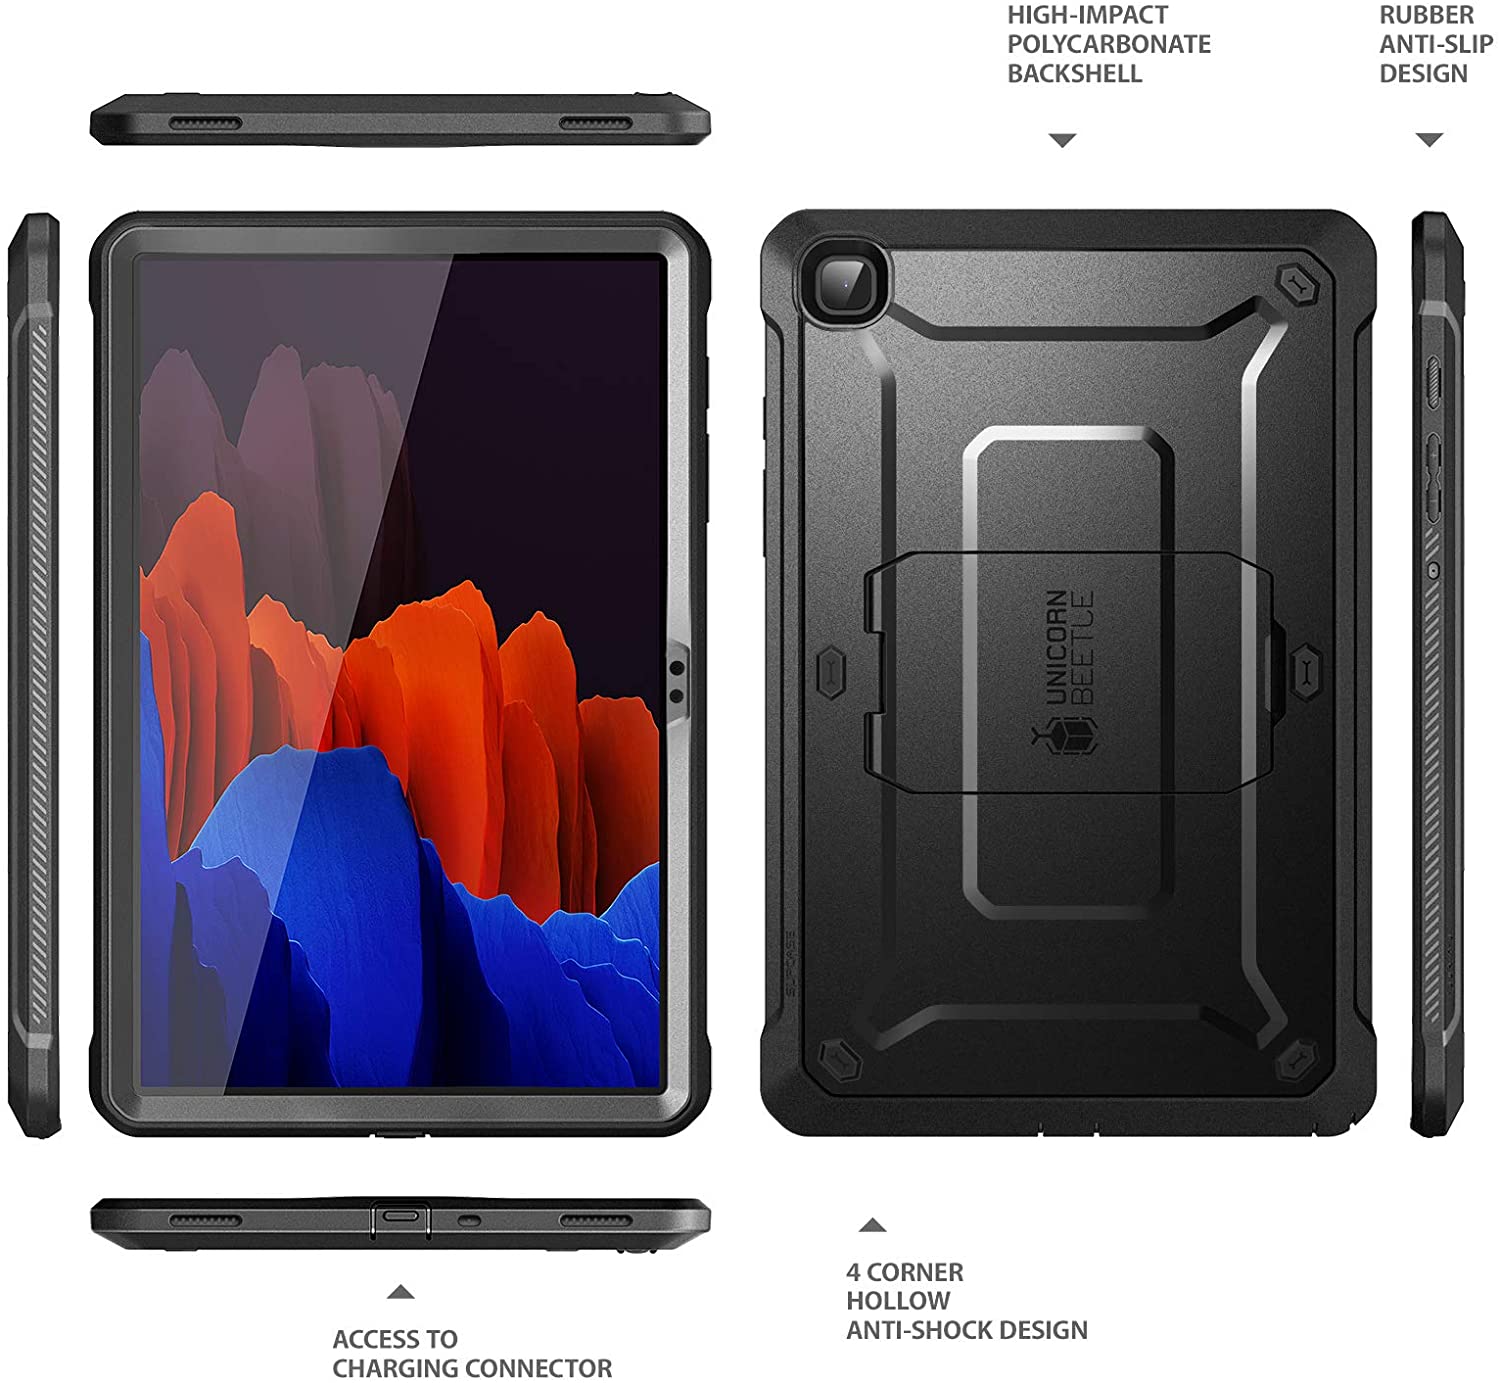 SUPCASE Unicorn Beetle Pro Galaxy Tab A7 10.4" (2020) Built-in Screen Protector Full-Body Rugged Heavy Duty Case (Black)